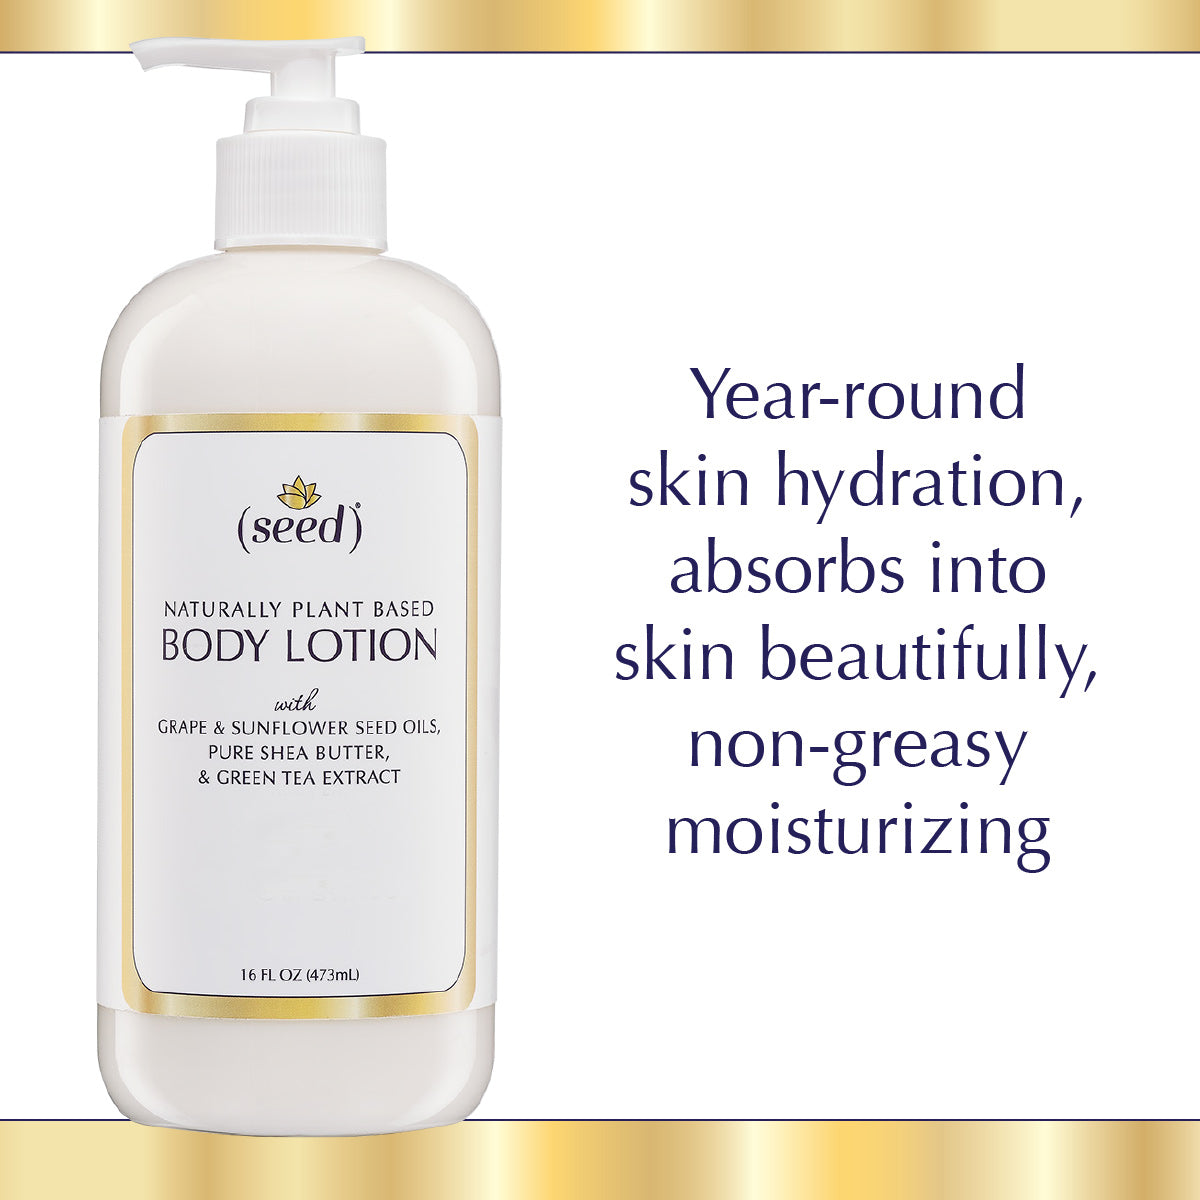 Seed Body Lotion offers year round skin hydration, absorbs into skin and is non greasy moisturizing